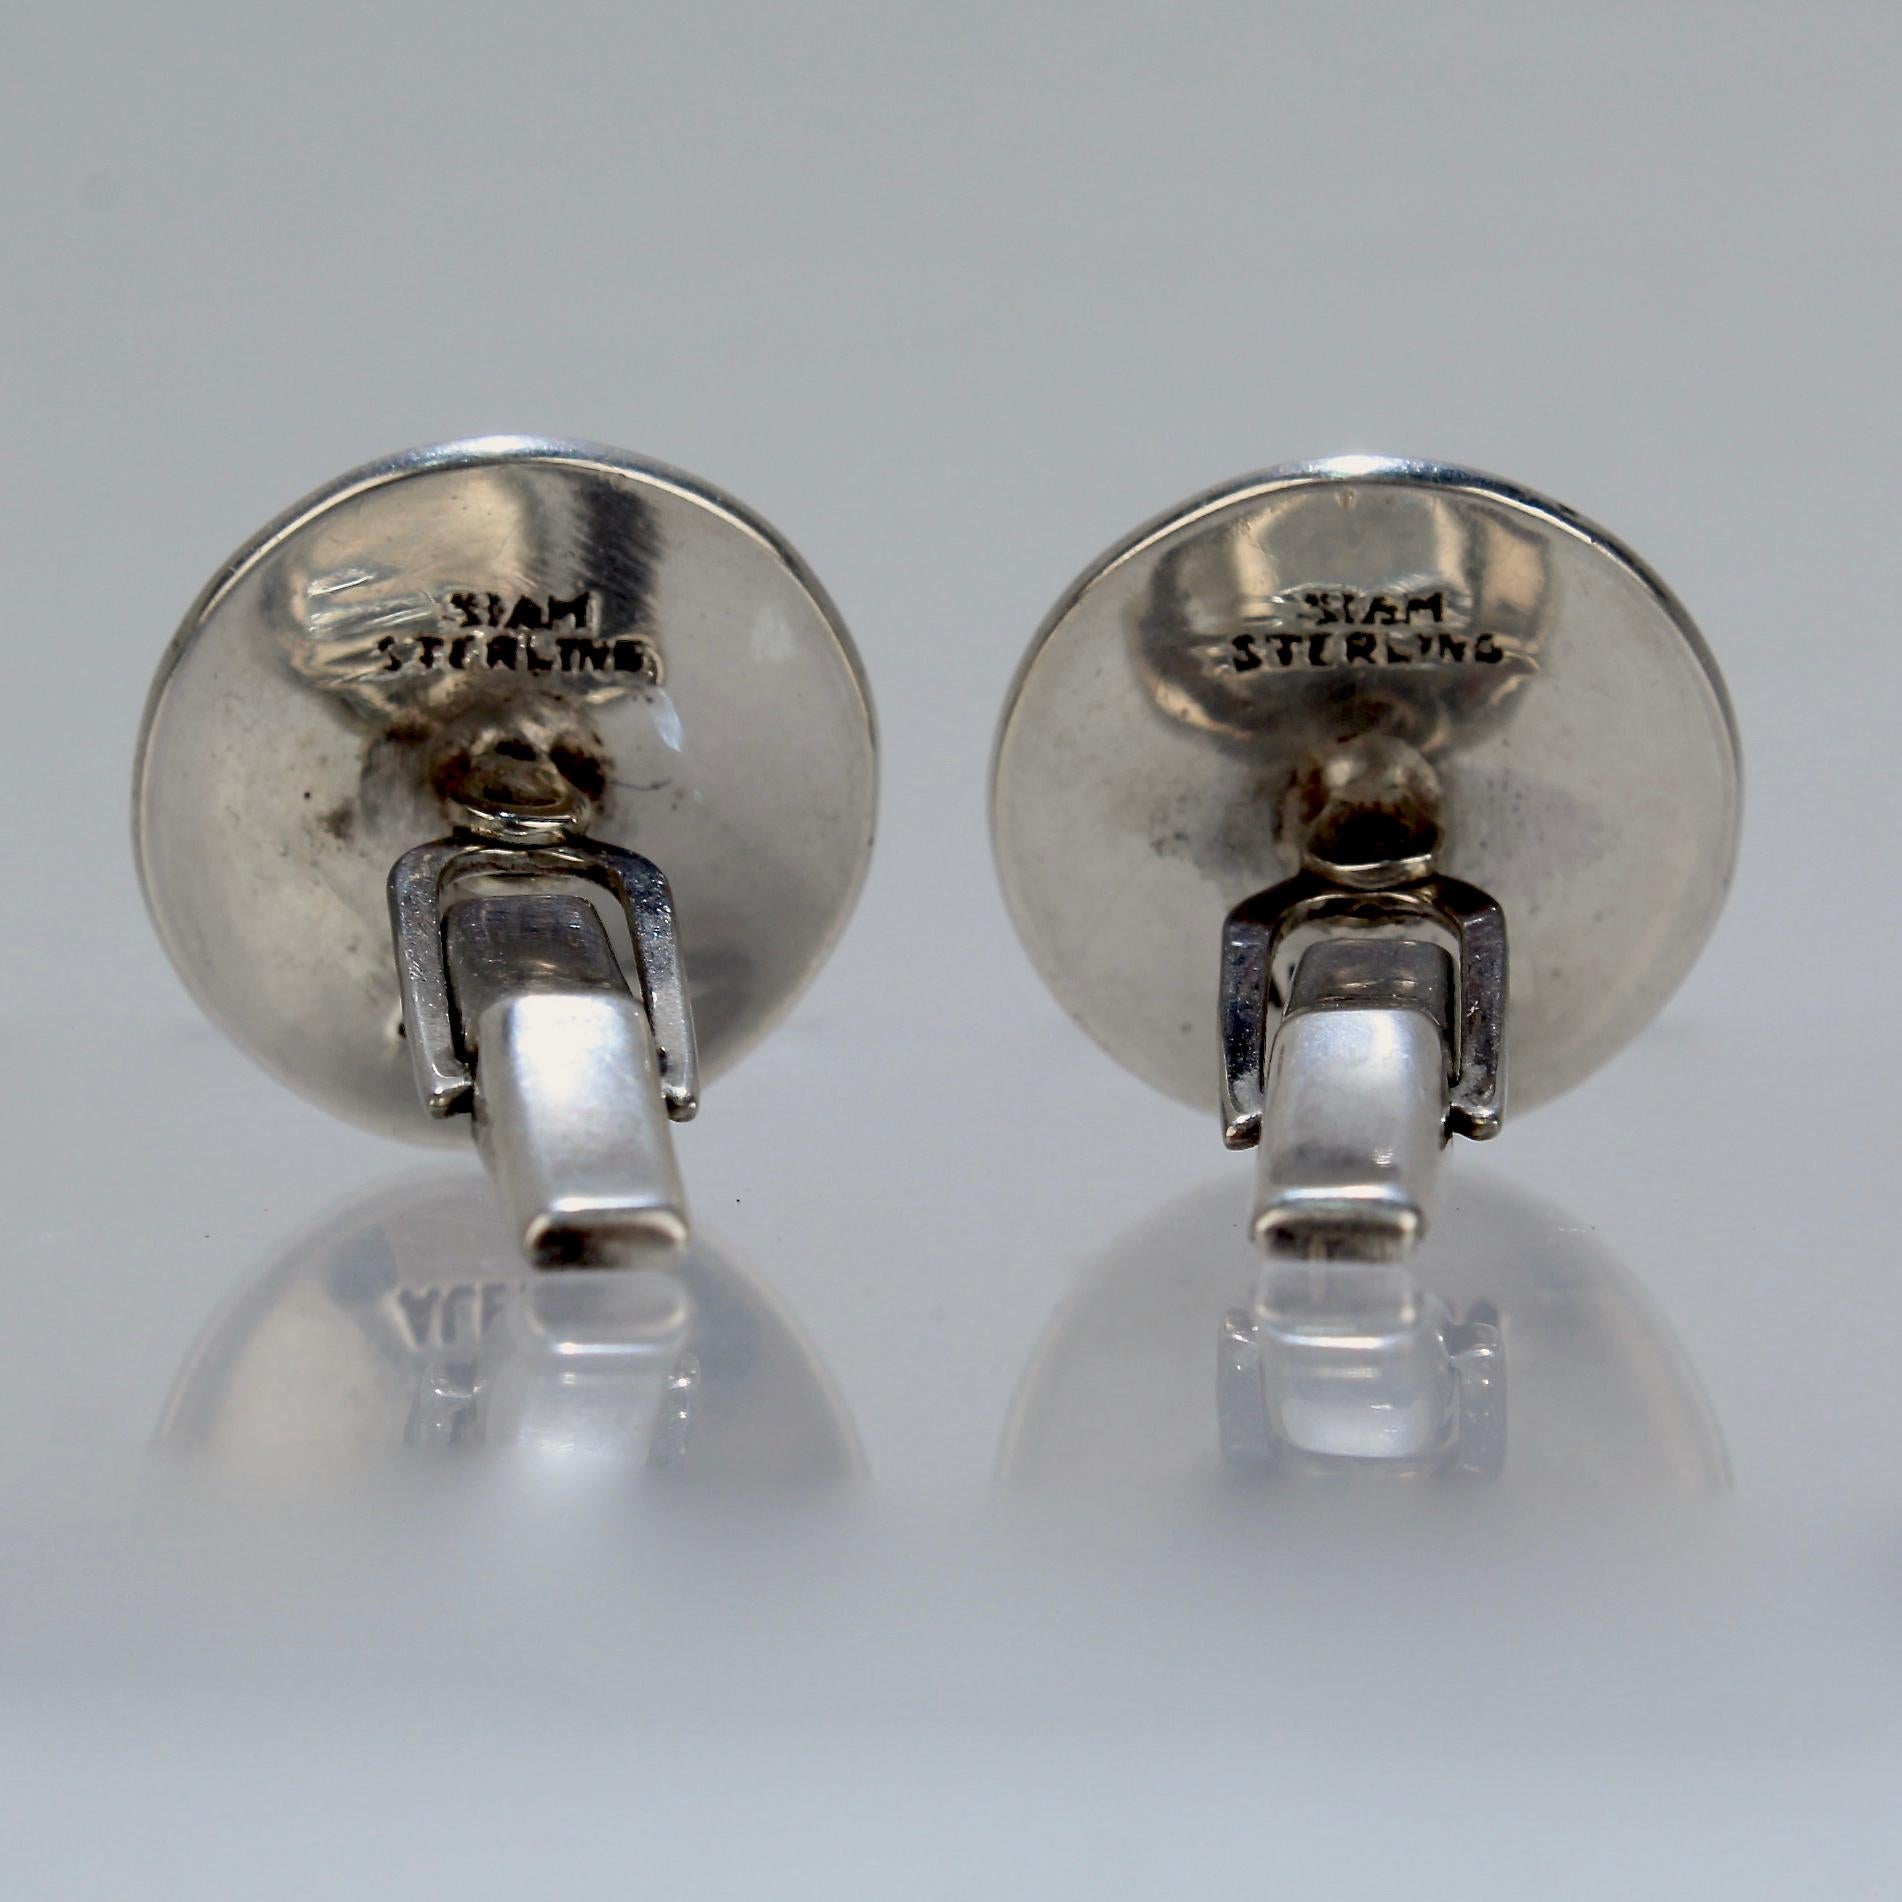 Pair of '76' Niello Sterling Silver Cufflinks by Alex Co of Siam For Sale 2